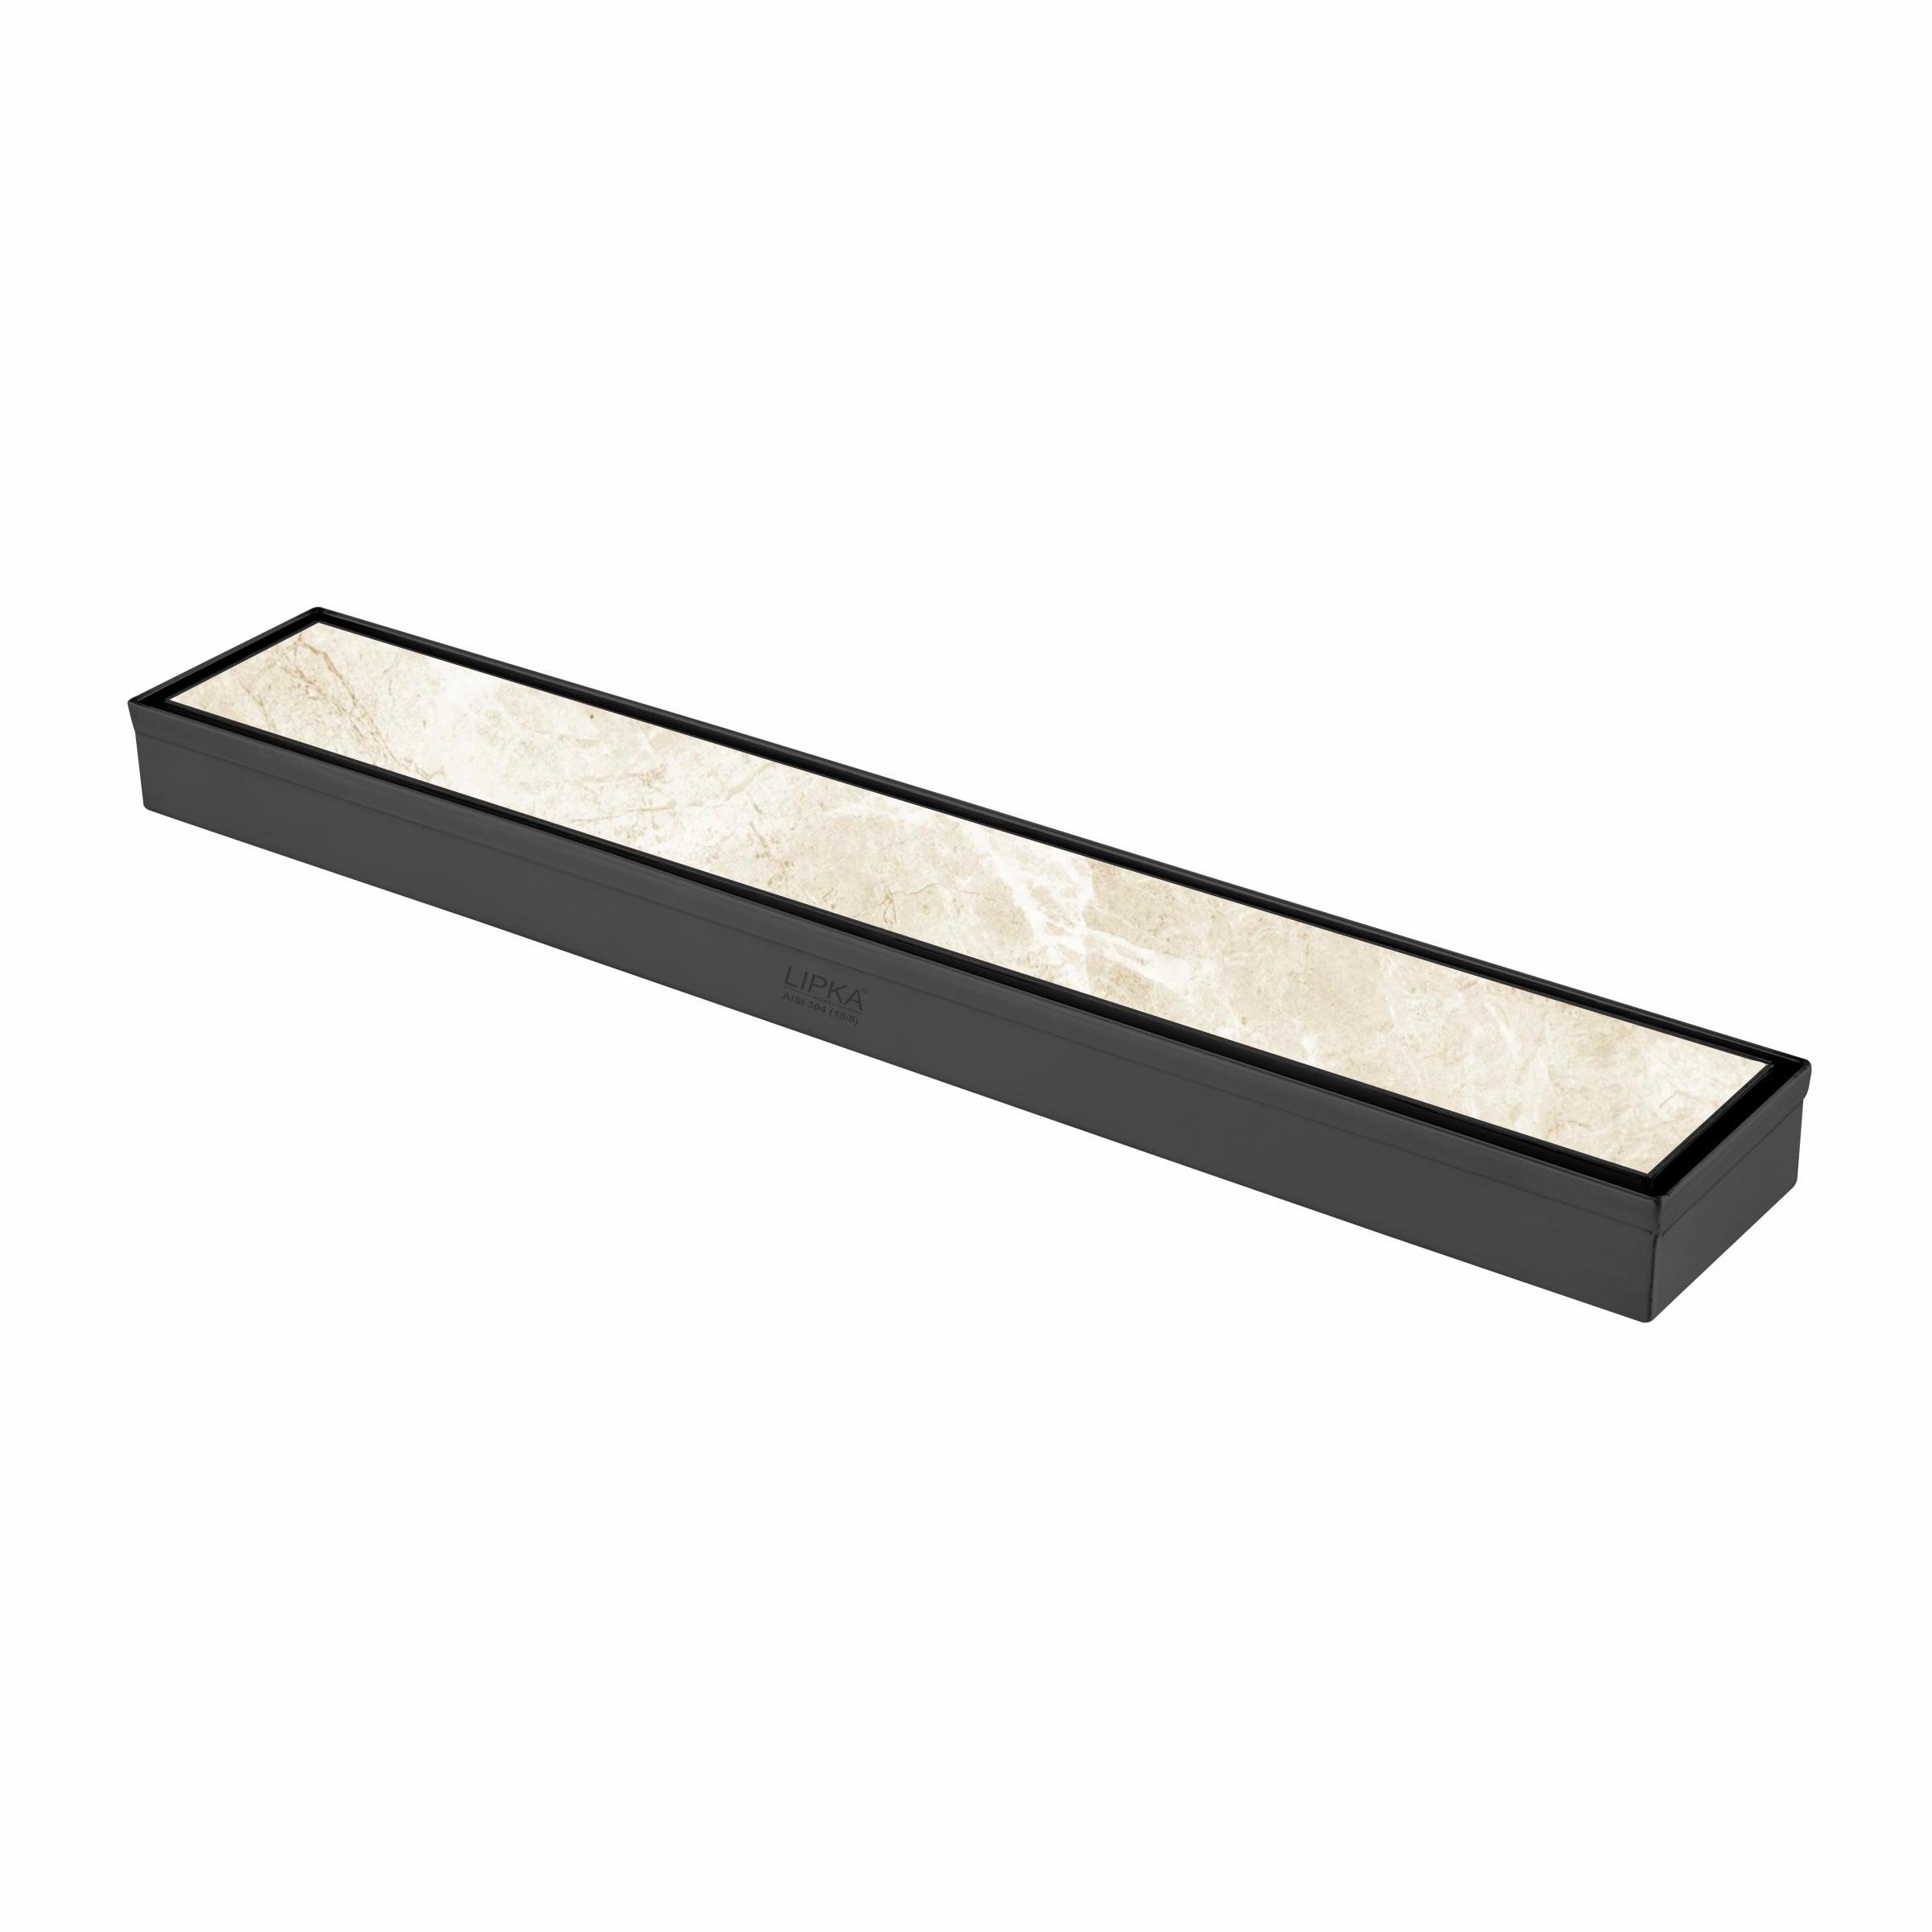 Tile Insert Shower Drain Channel - Black (12 x 2 Inches)